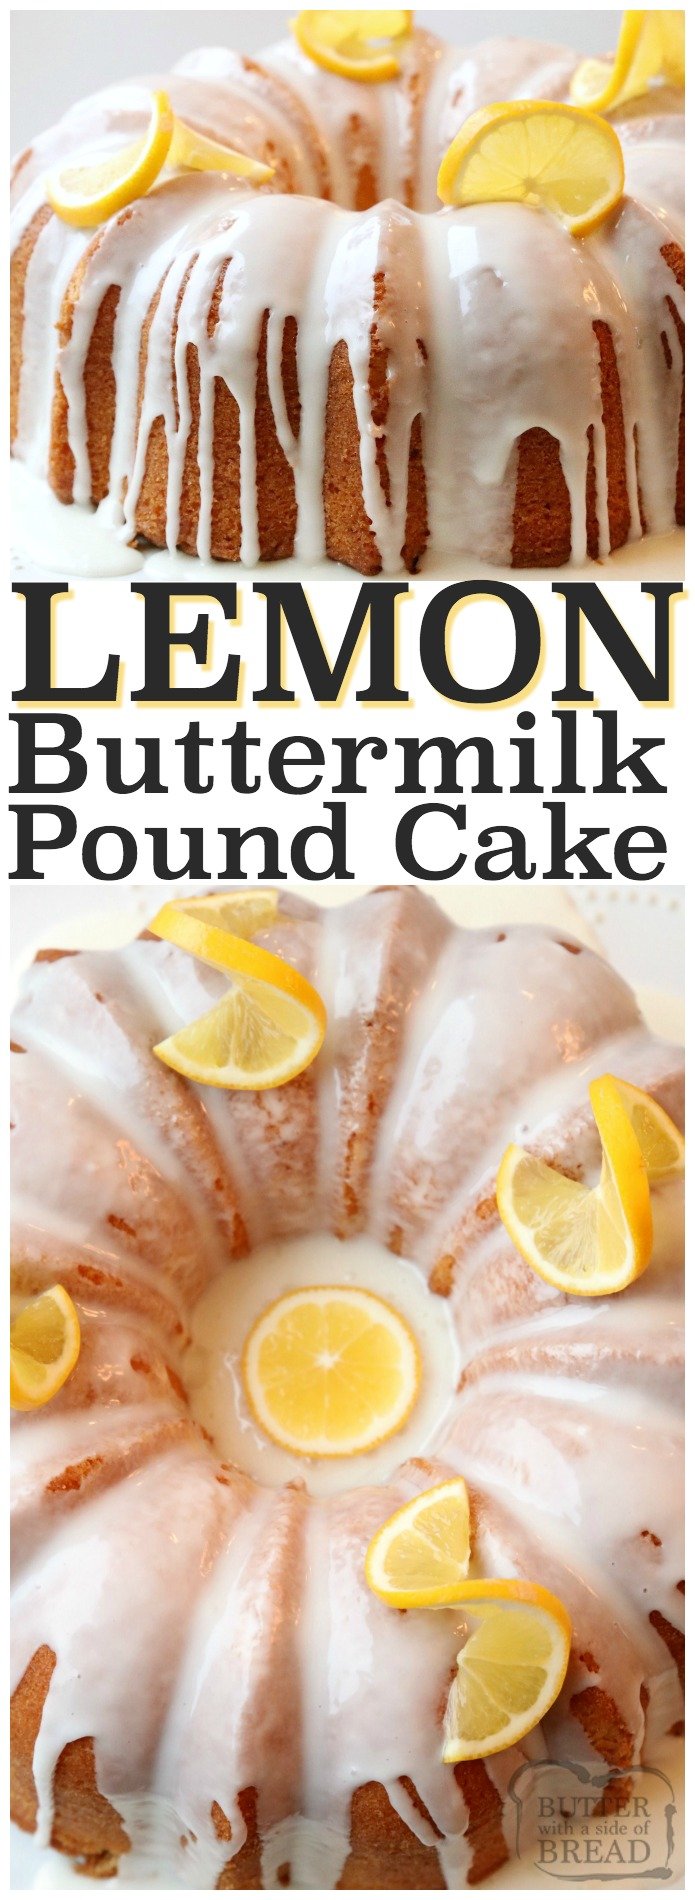 Lemon Buttermilk Pound Cake is a classic pound cake recipe with the addition of fresh lemon! Buttermilk gives this Lemon Pound Cake a wonderful texture and everyone loves the bright flavor of the lemon glaze. It's the perfect pound cake!  Lovely, elegant #Lemon #buttermilk #poundCake #cake #recipe from Butter With A Side of Bread #dessert #bundtcake #lemonrecipe #lemoncake #food #homemade